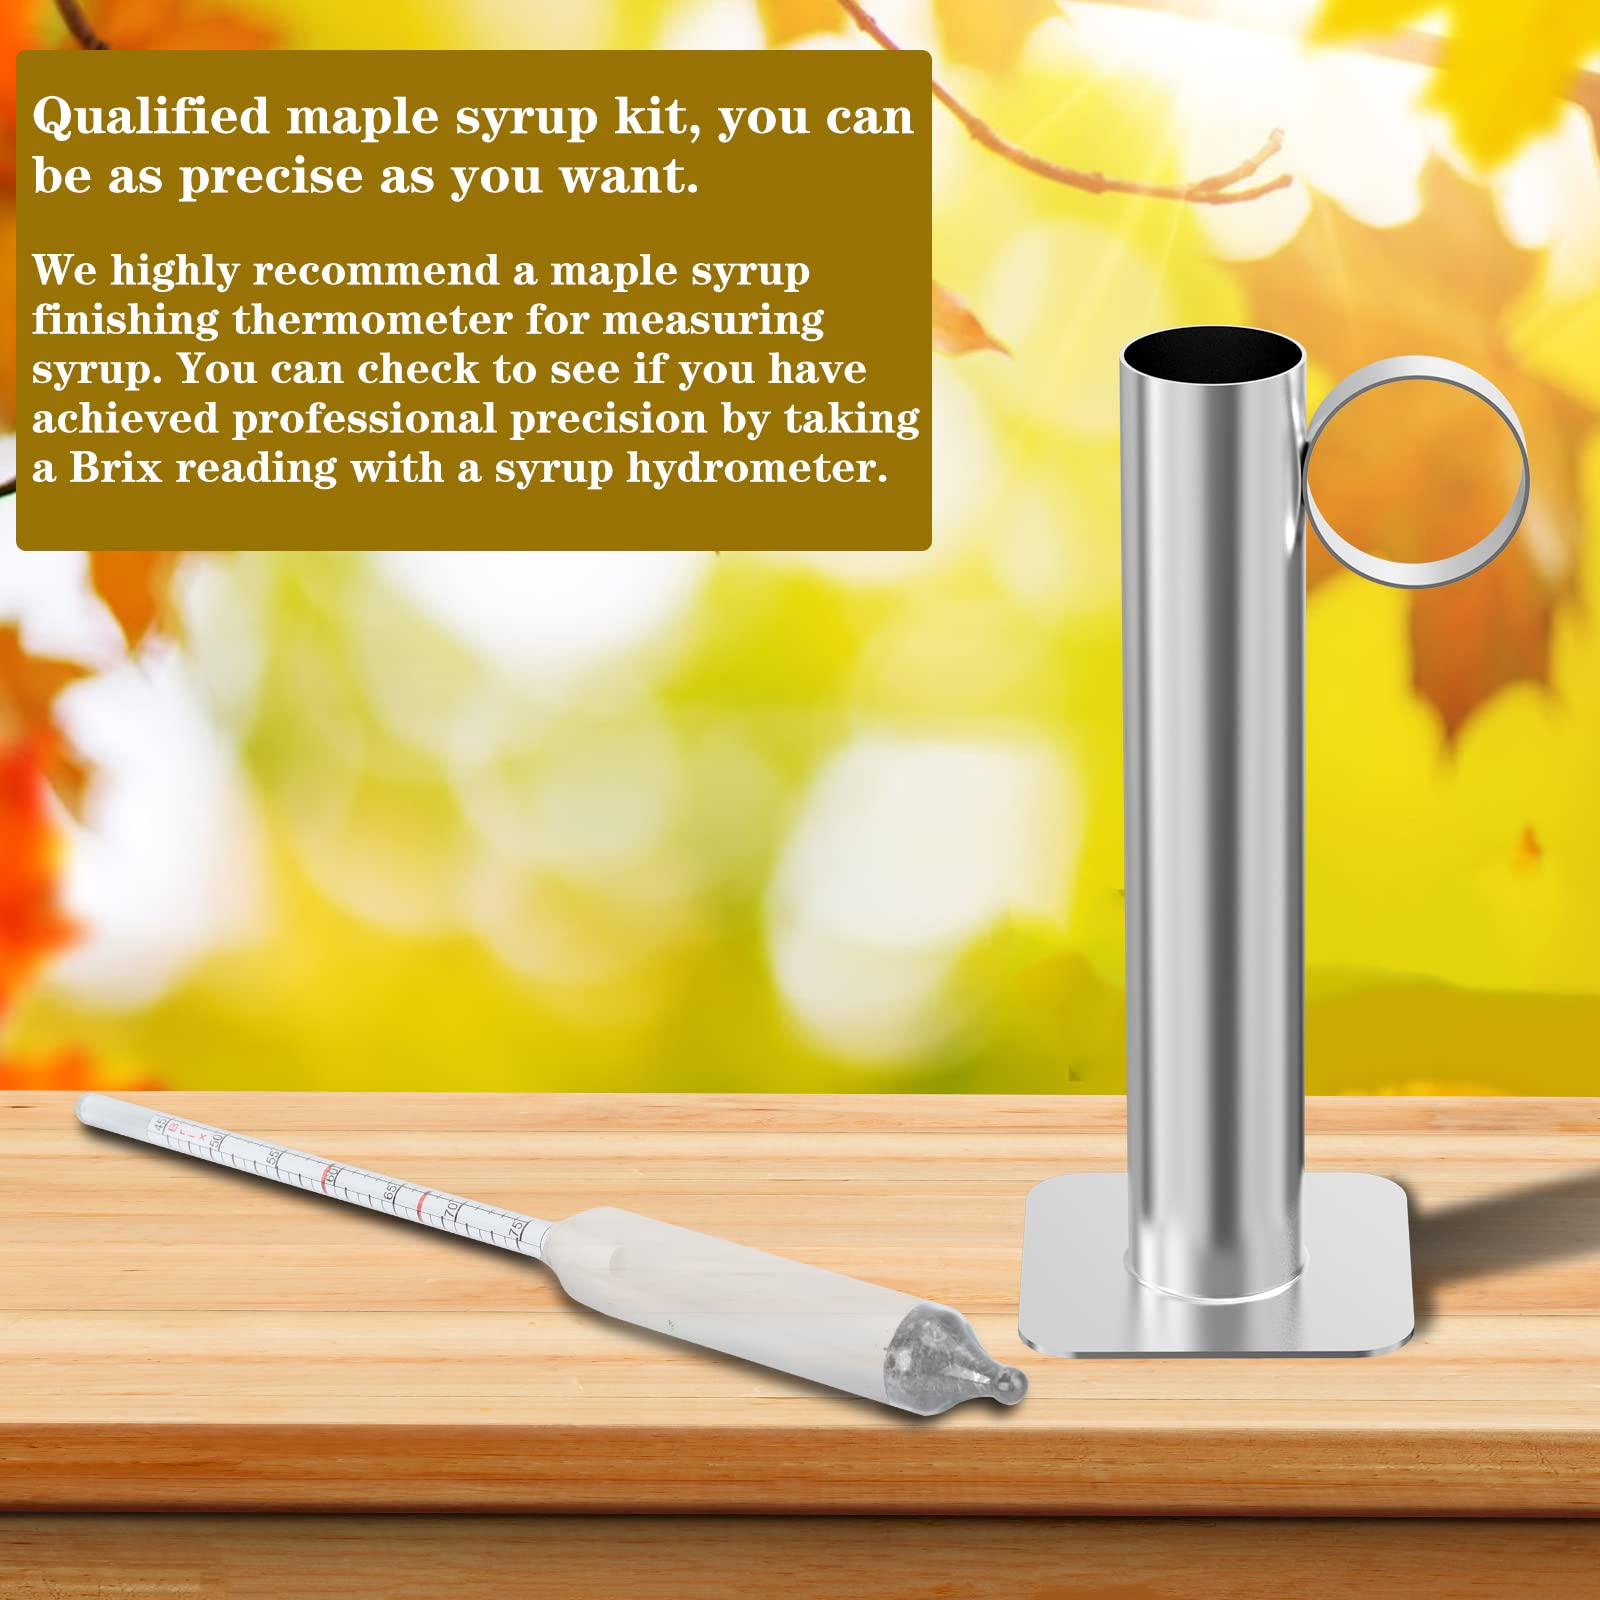 Maple Syrup Hydrometer Test Cup kit, Maple Syrup Density Kit, Measures Sugar Content in The Syrup, Stainless Steel Maple Syrup Kit, Easy to Read and Accurate, with Cleaning Brush